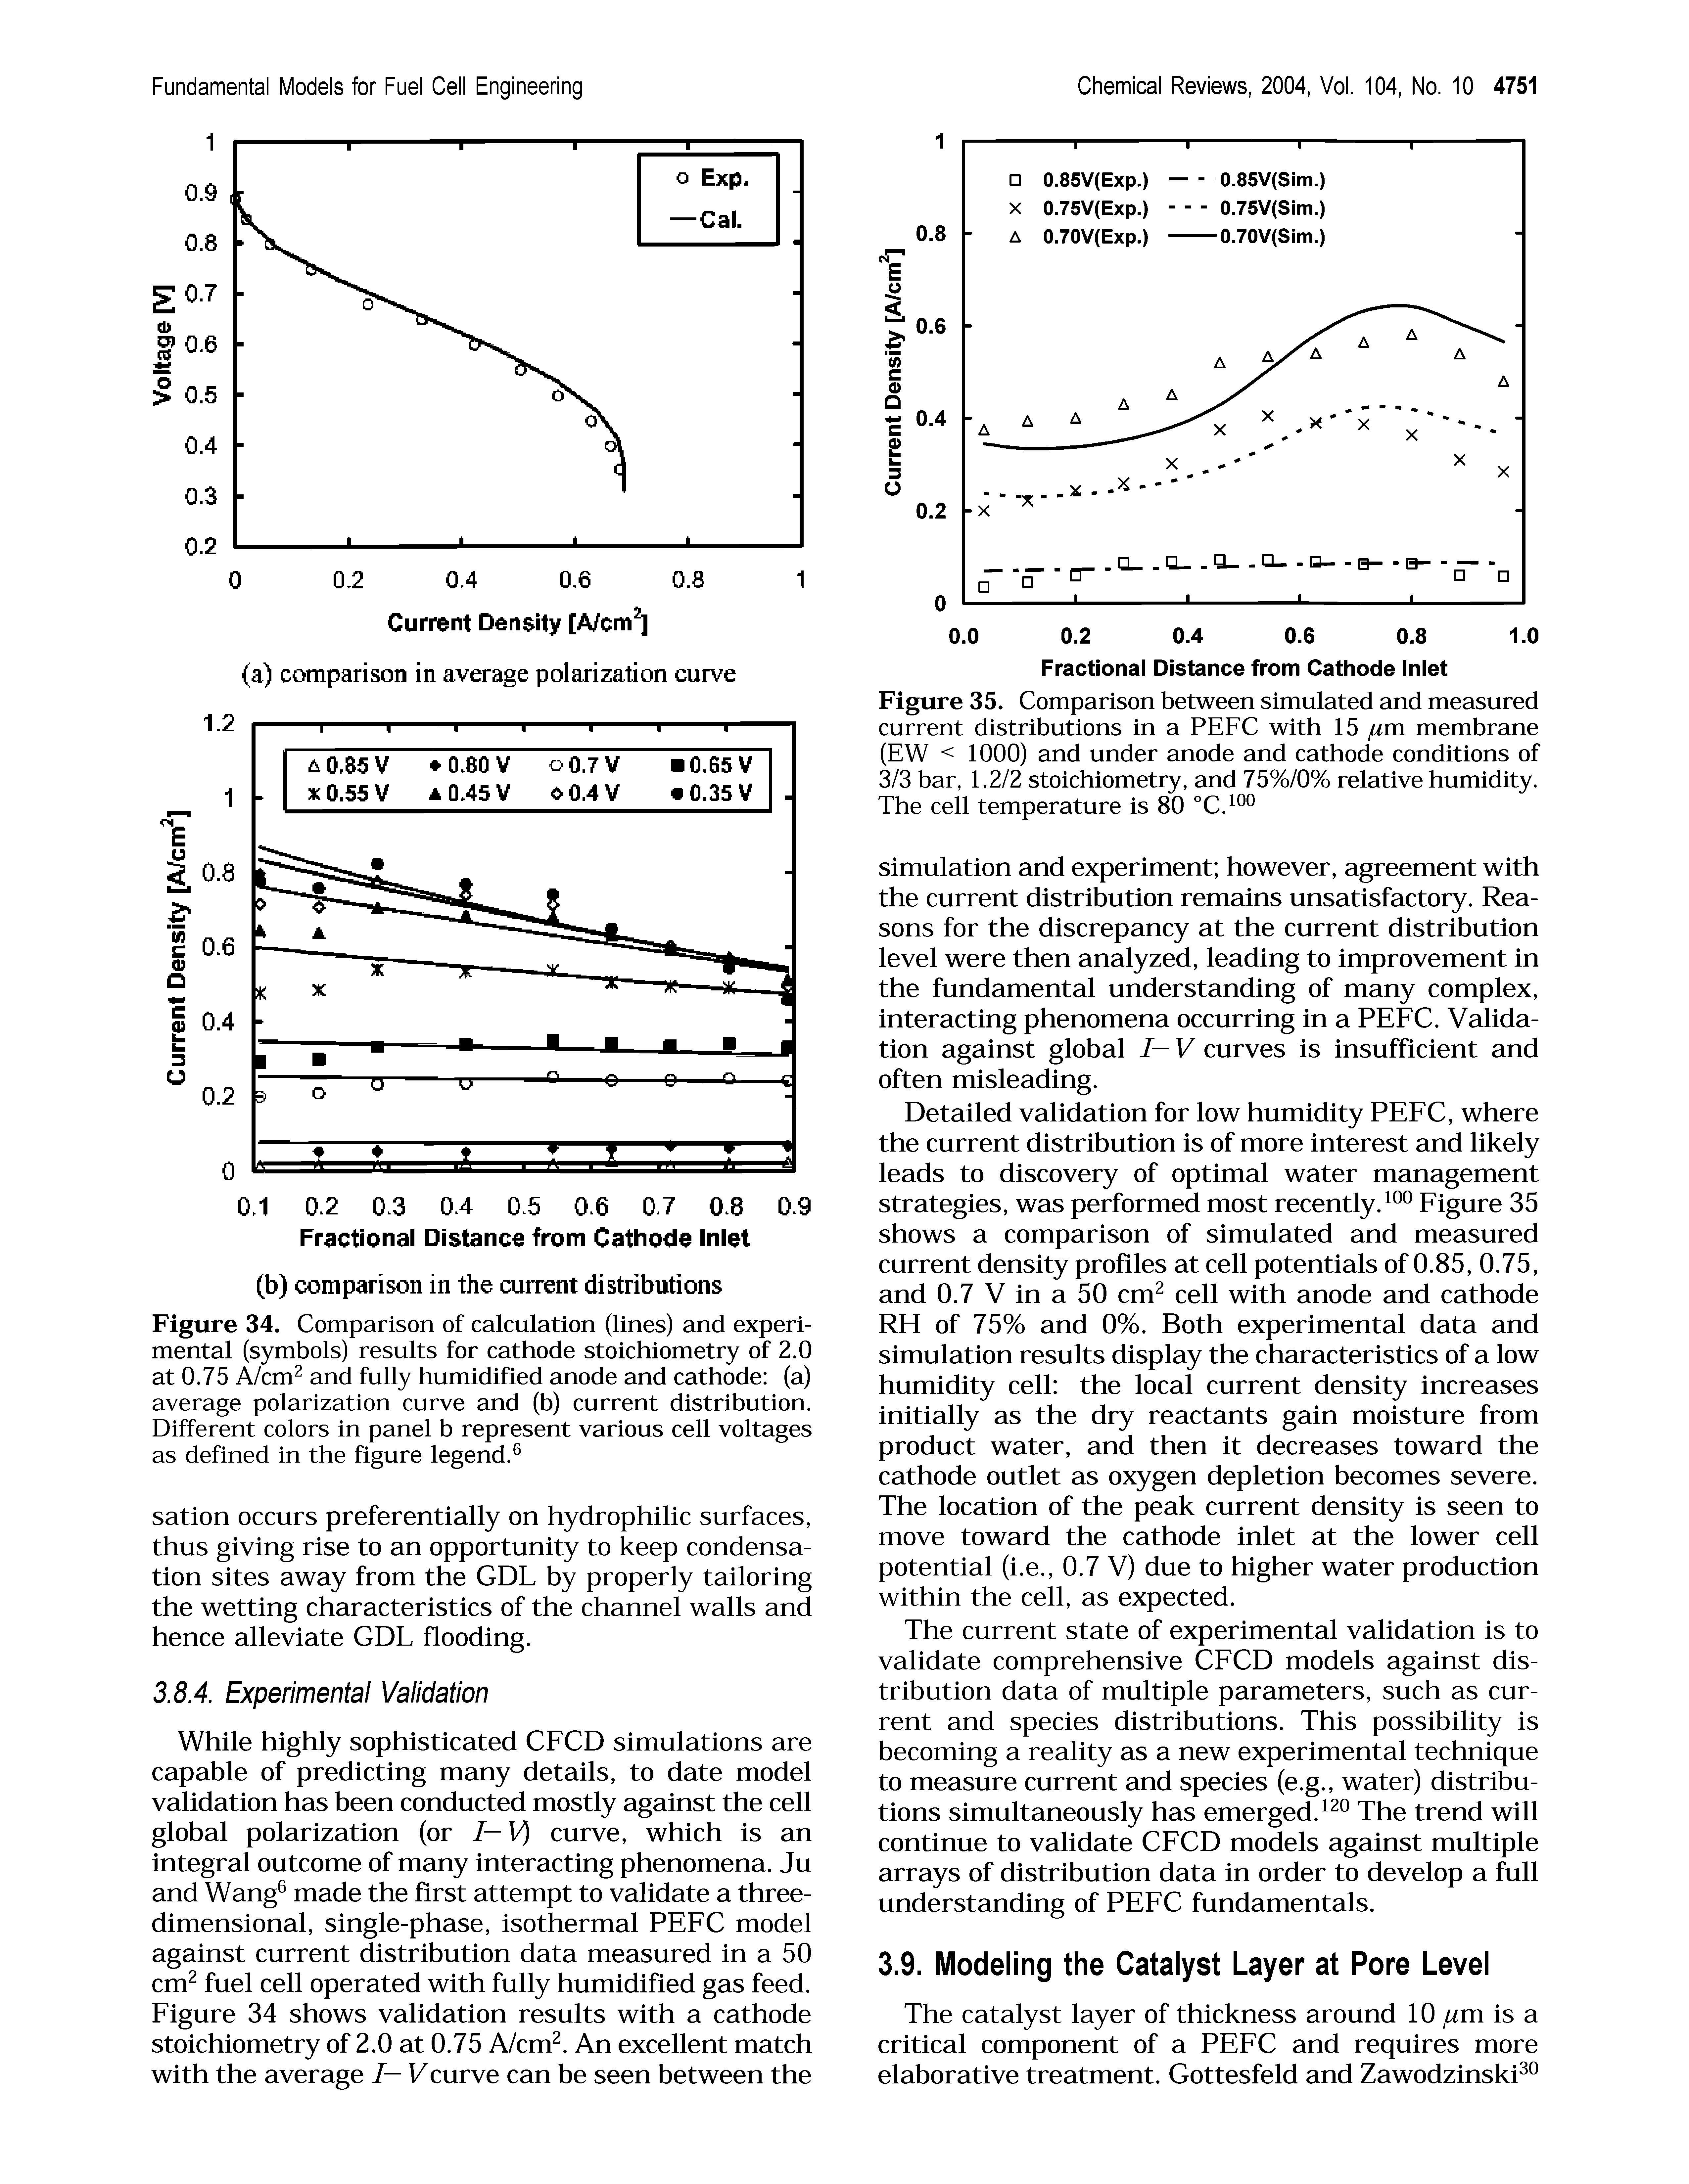 Figure 34. Comparison of calculation (lines) and experimental (symbols) results for cathode stoichiometry of 2.0 at 0.75 A/cm and fully humidified anode and cathode (a) average polarization curve and (b) current distribution. Different colors in panel b represent various cell voltages as defined in the figure legend. ...